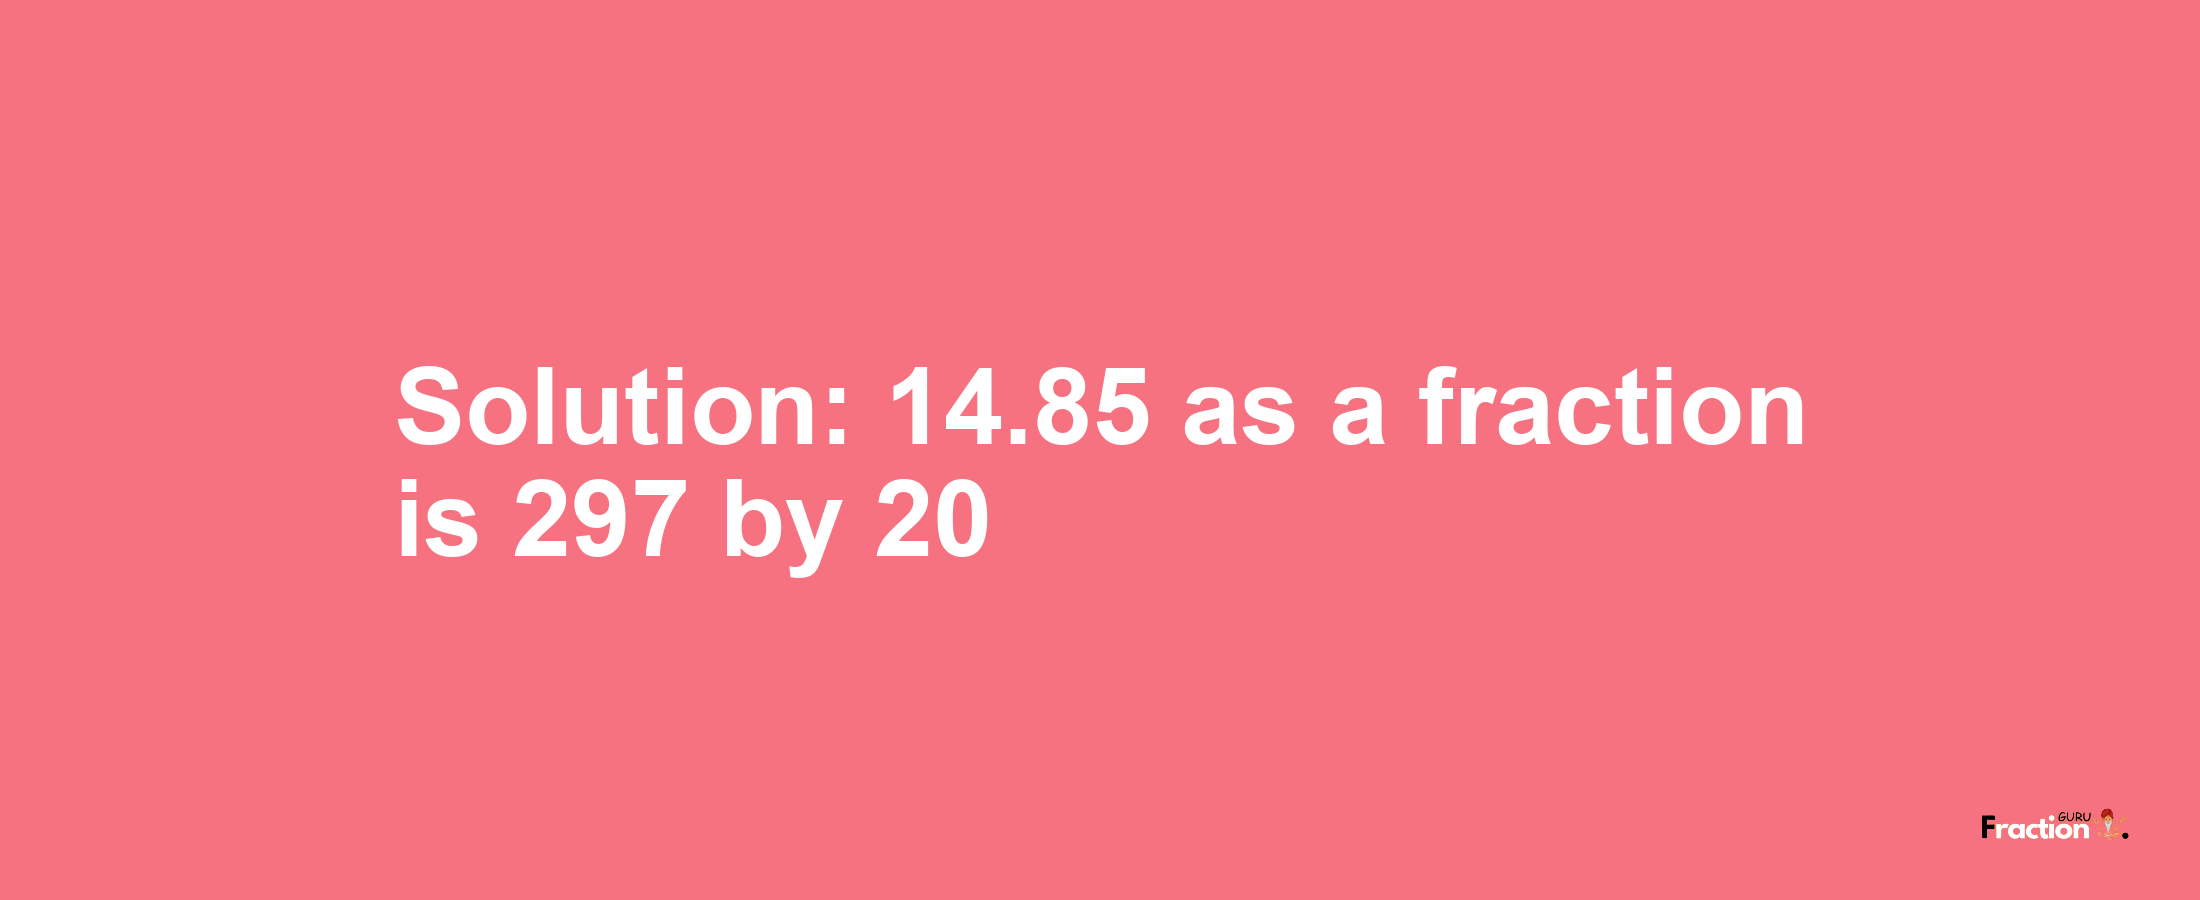 Solution:14.85 as a fraction is 297/20